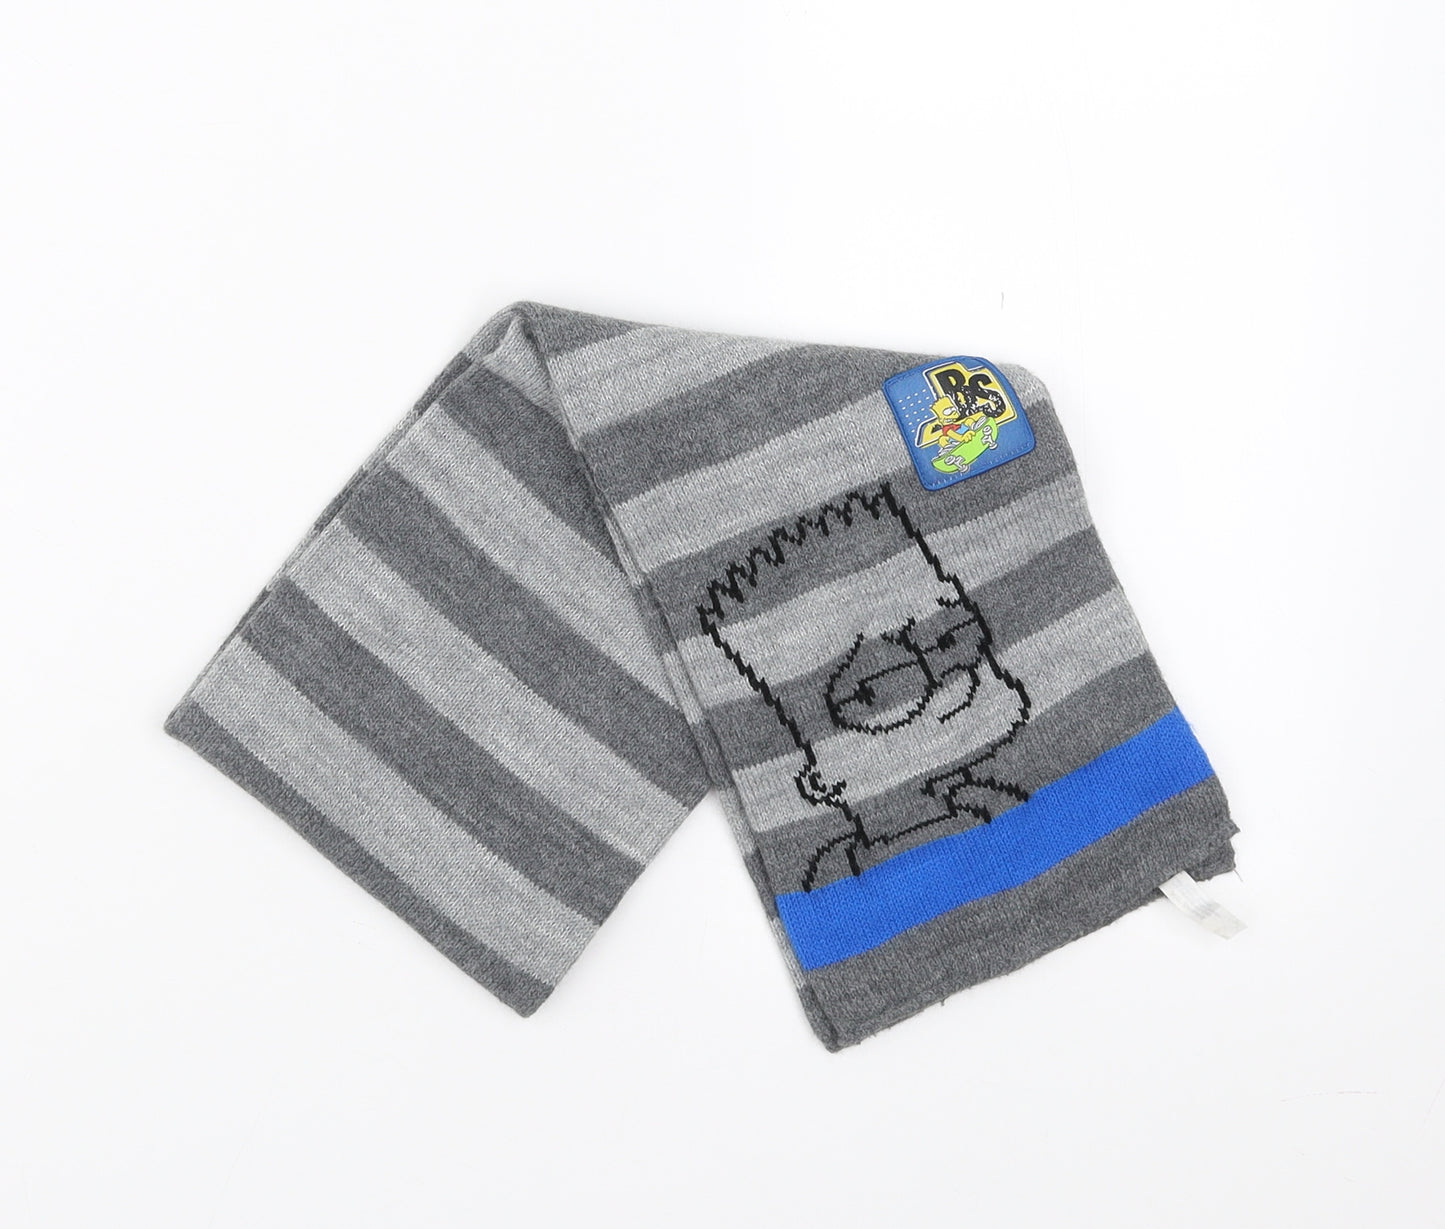 The Simpsons Boys Grey Striped  Scarf  One Size  - The Simpsons